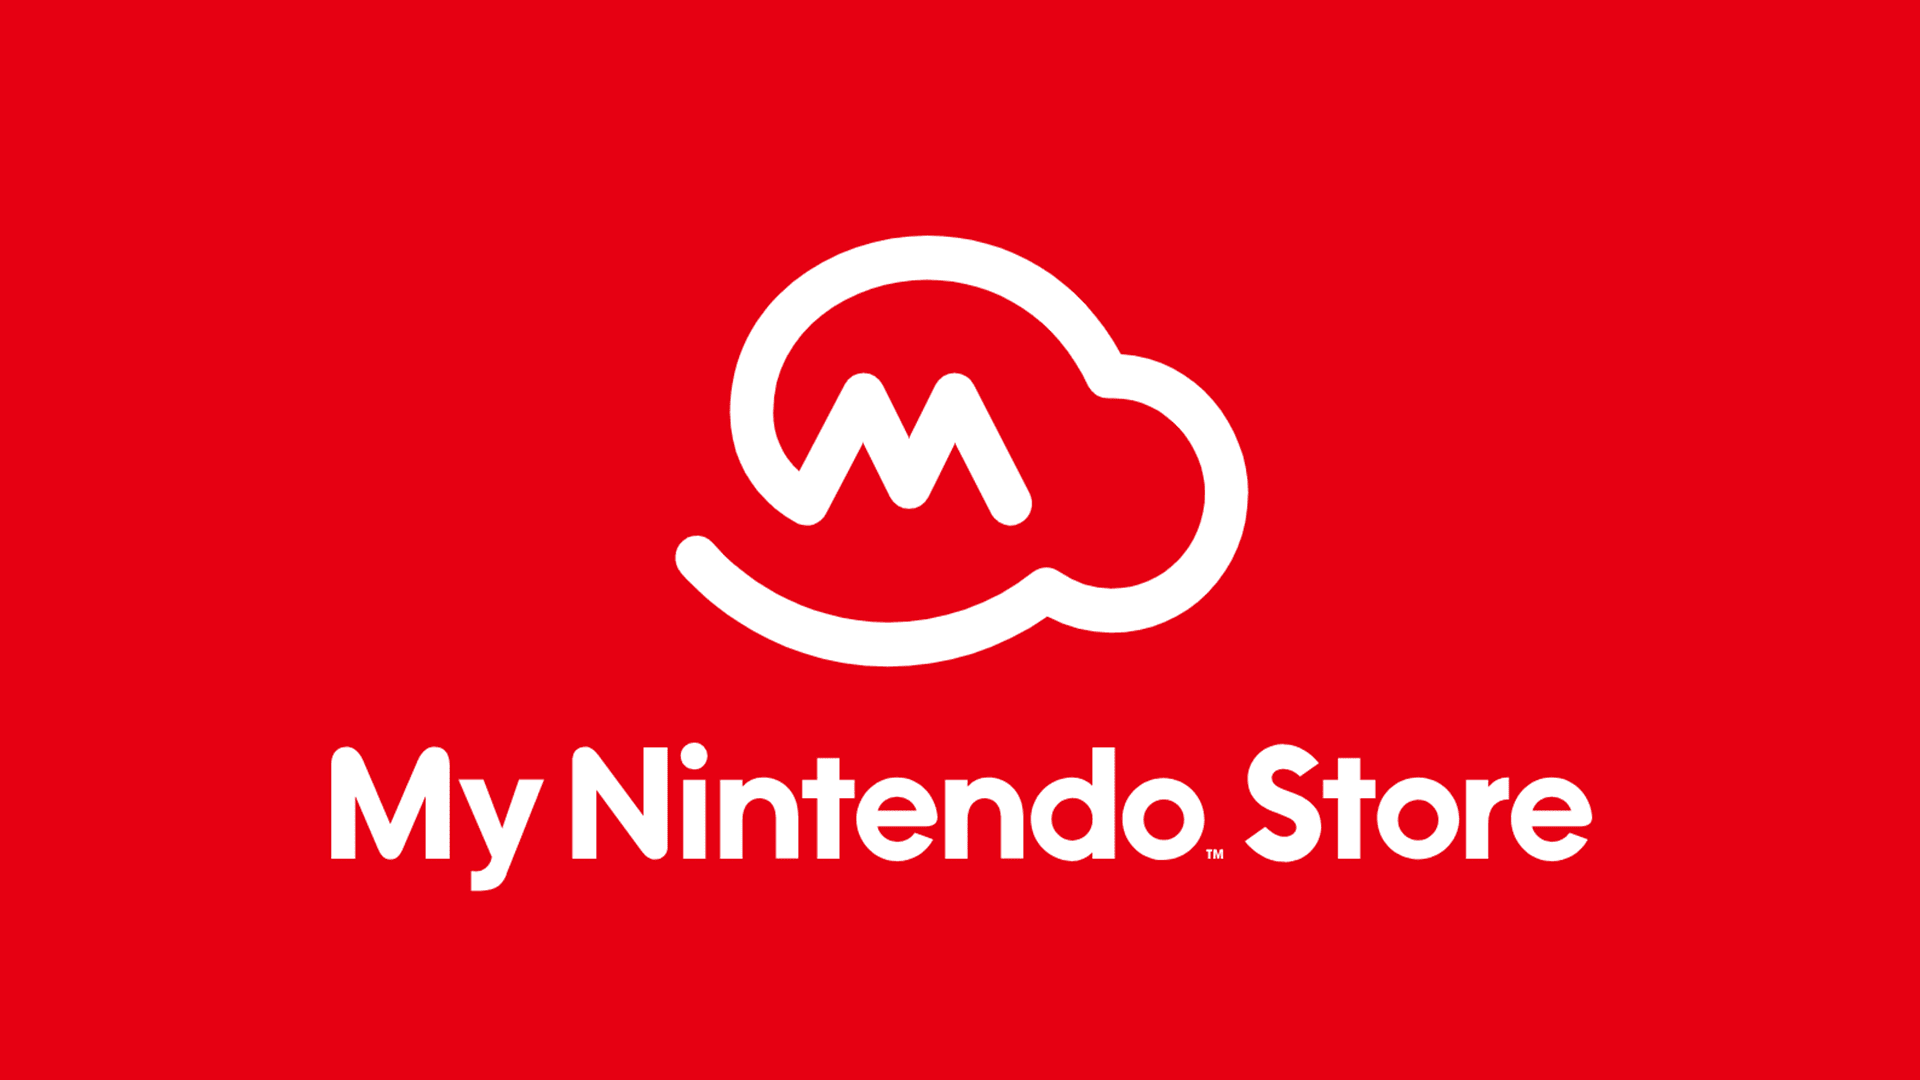 Click here to learn more about this item on the My Nintendo Store